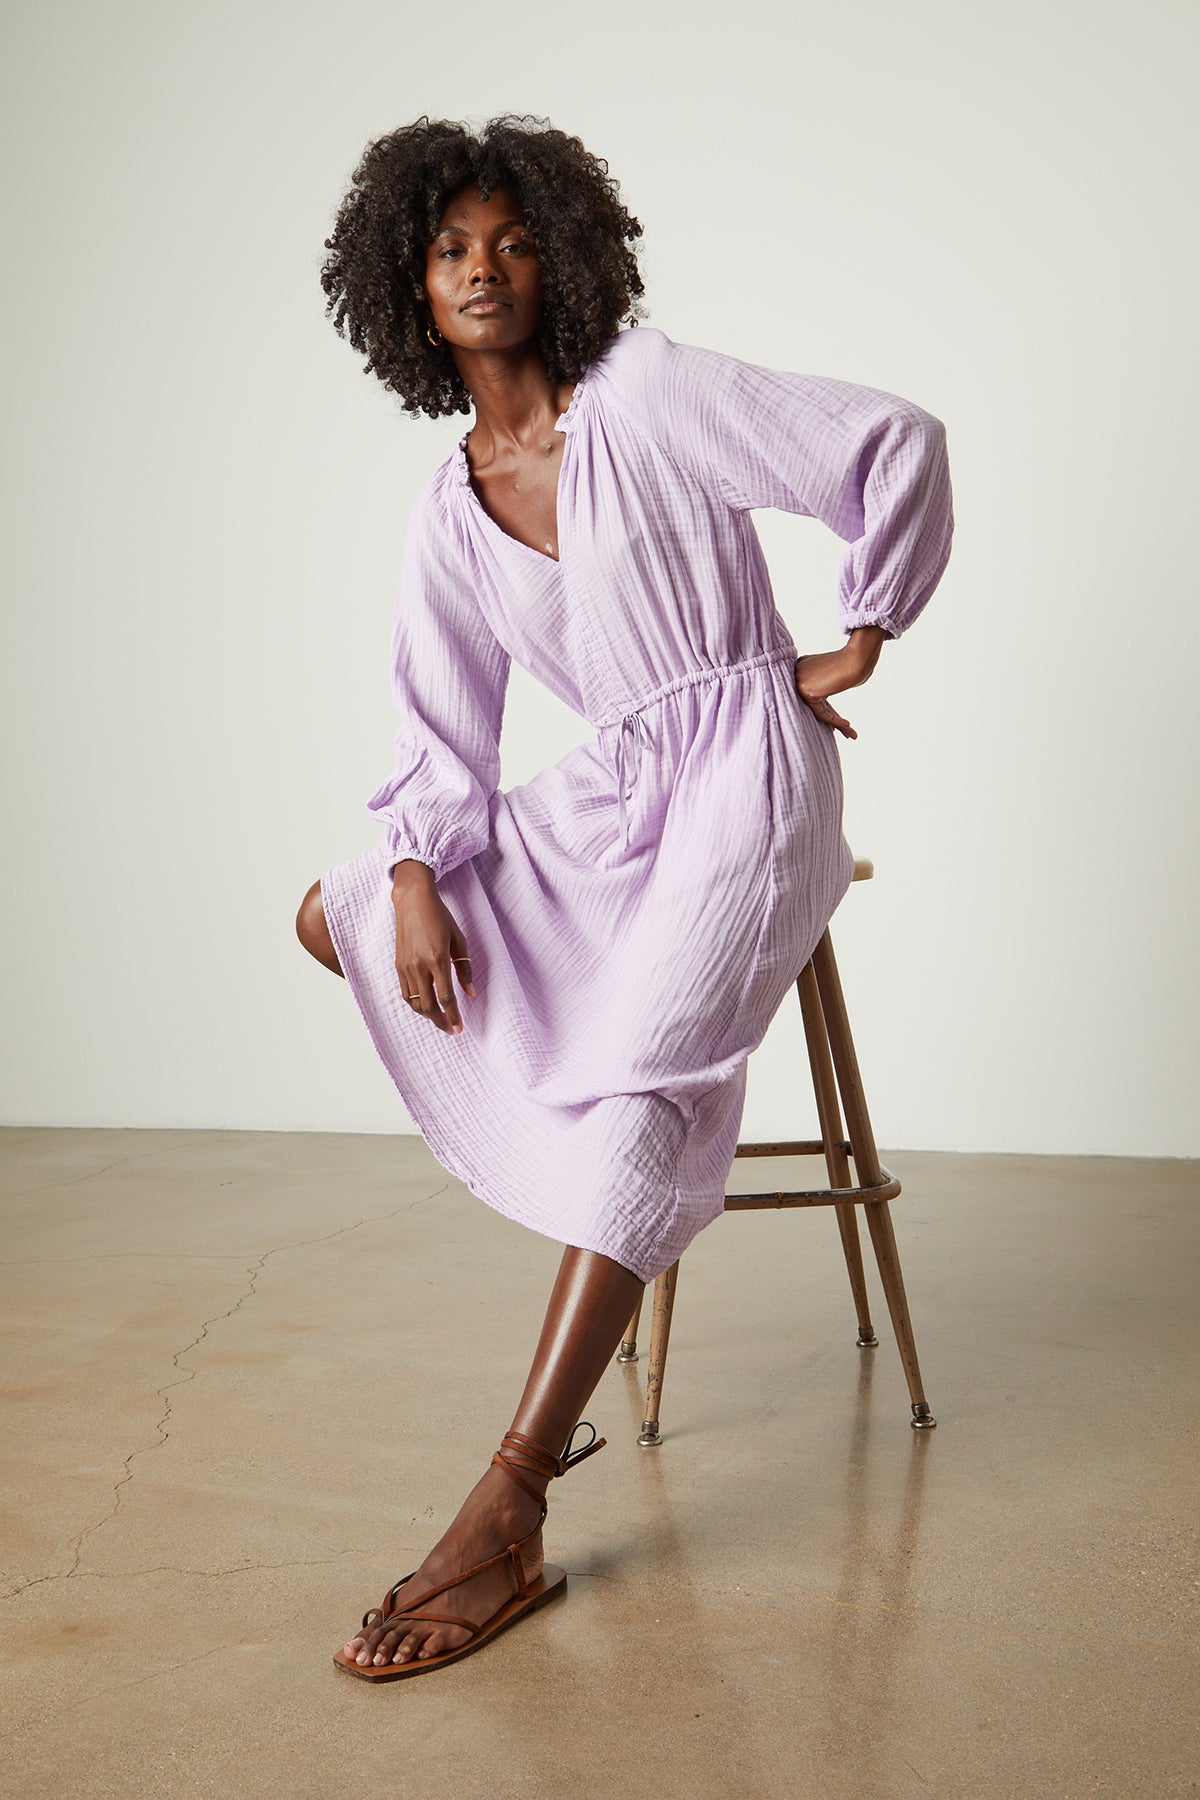 Model sitting on stool wearing Audrey cotton gauze dress in light lavender thistle color-26078934106305